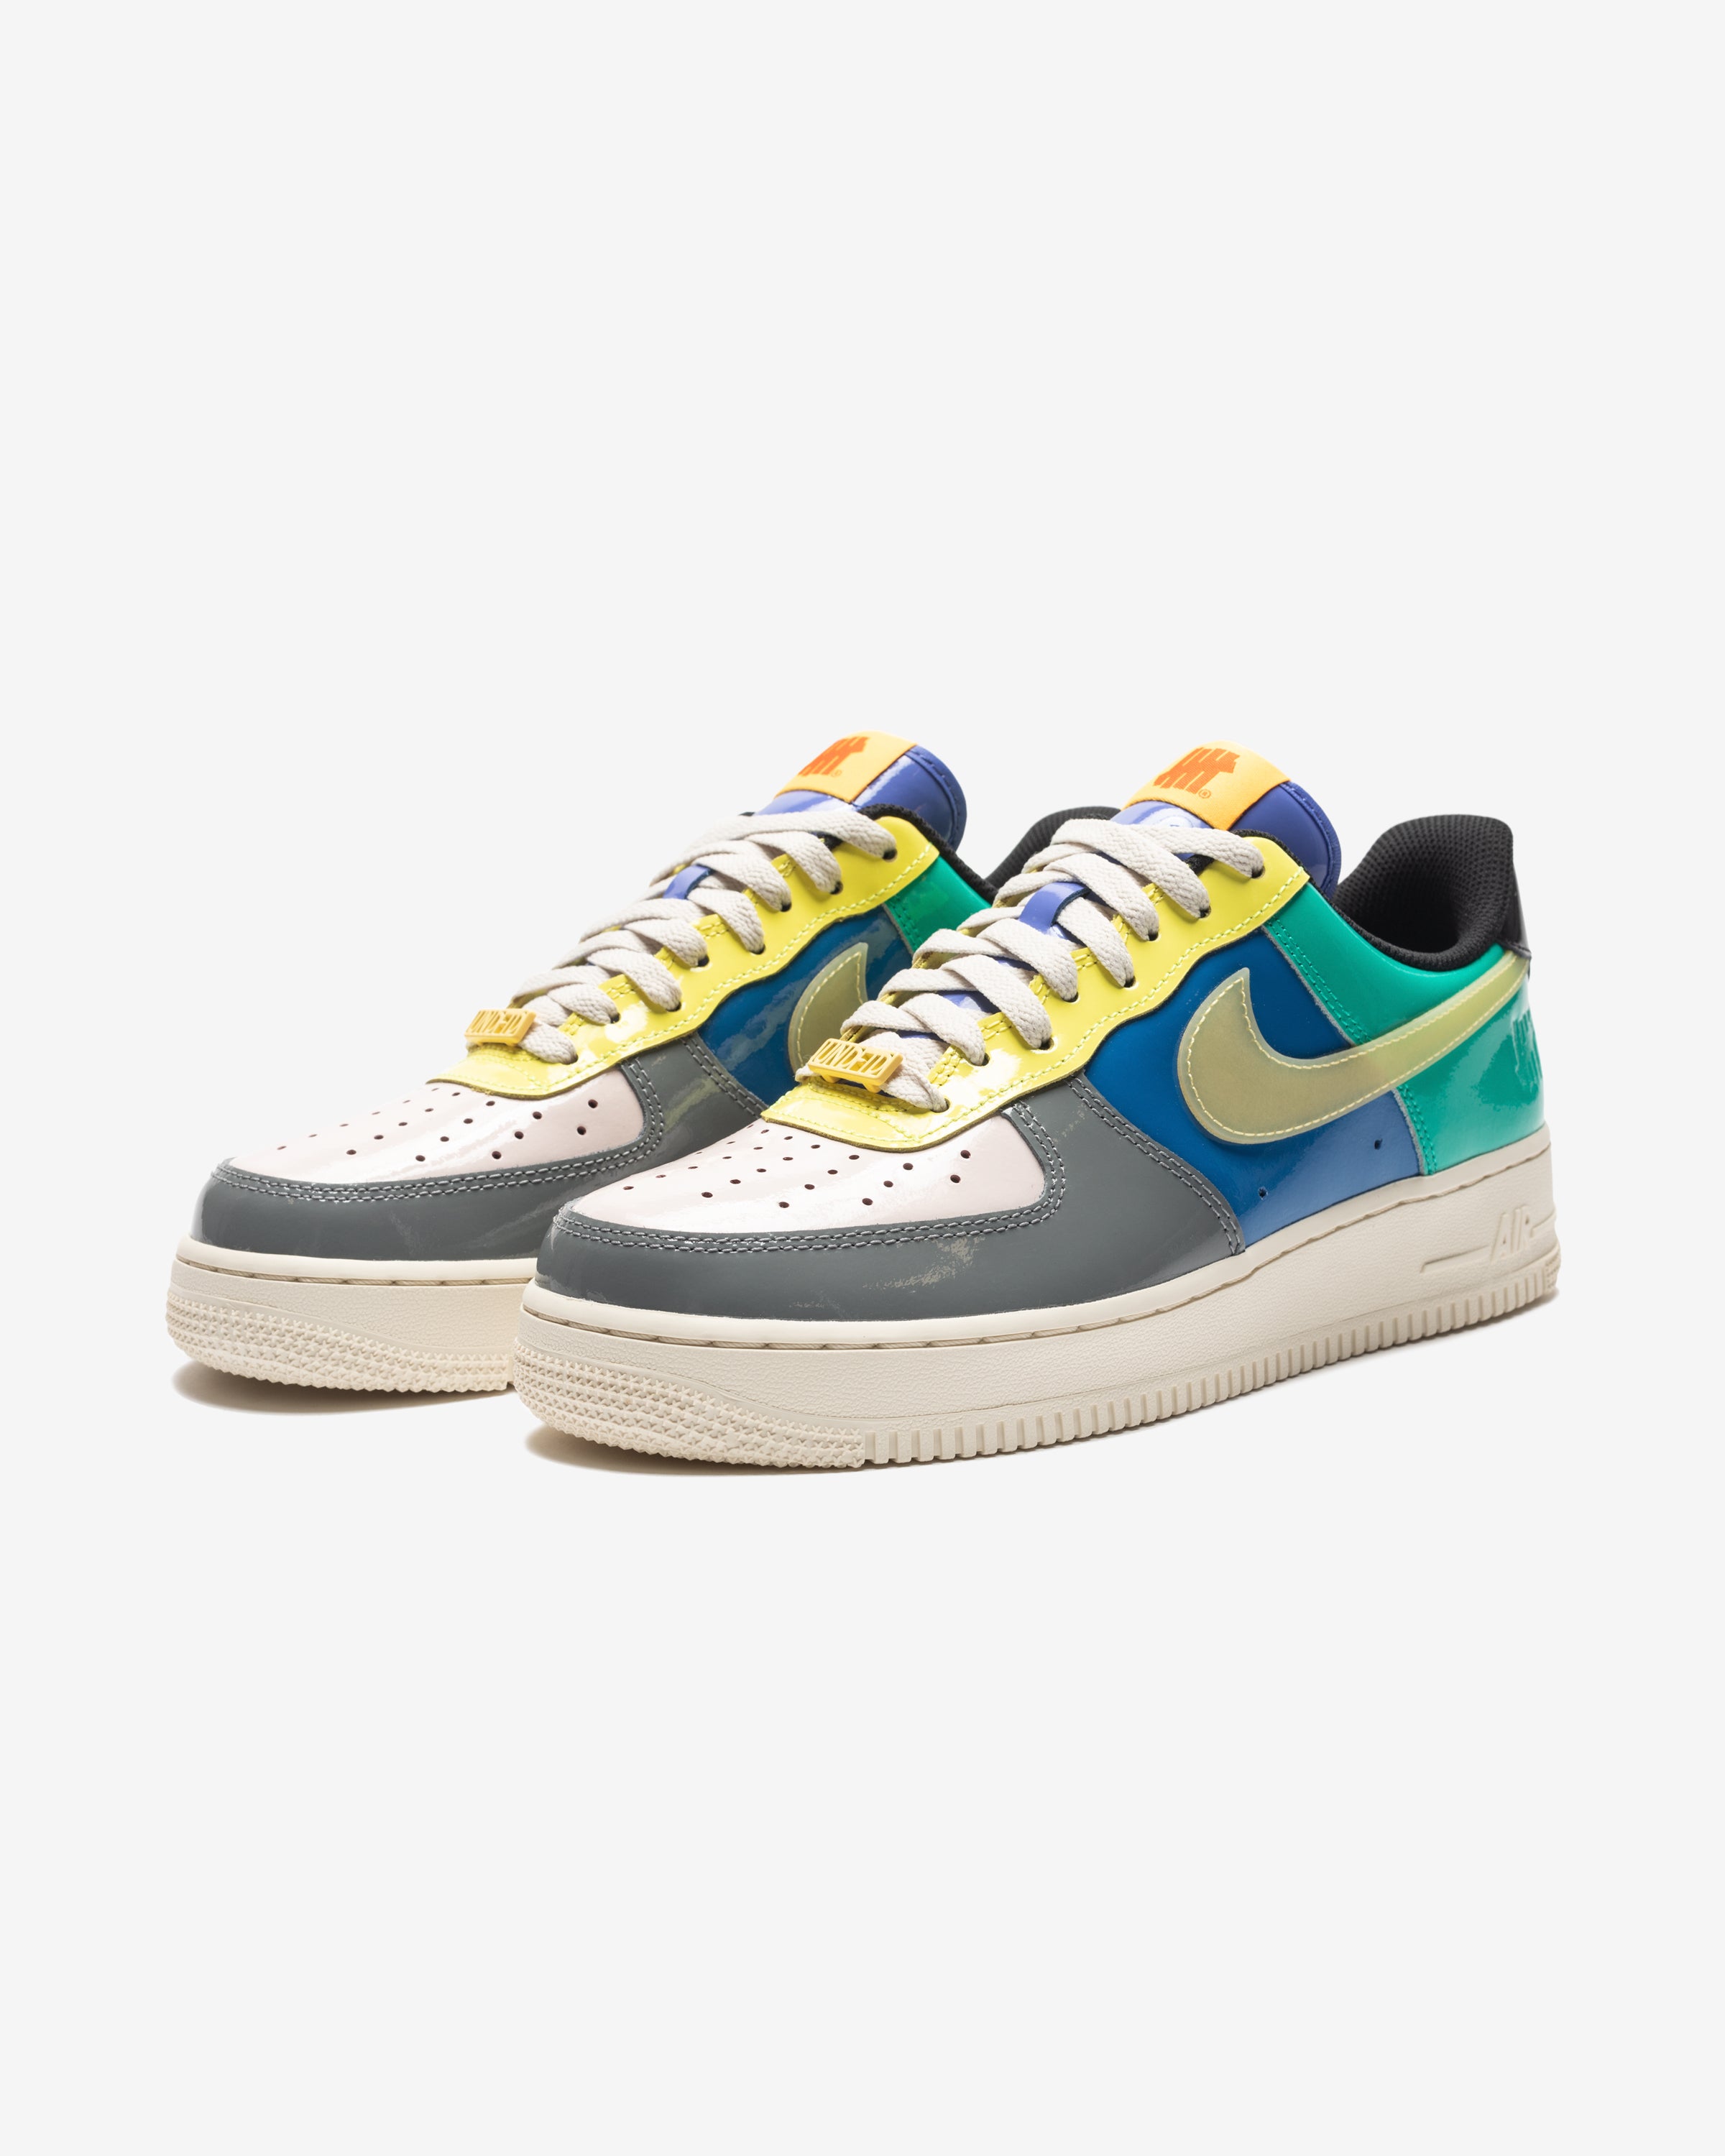 UNDEFEATED X NIKE AIR FORCE 1 LOW SP - SMOKEGREY/ GOLD/ MULTI 